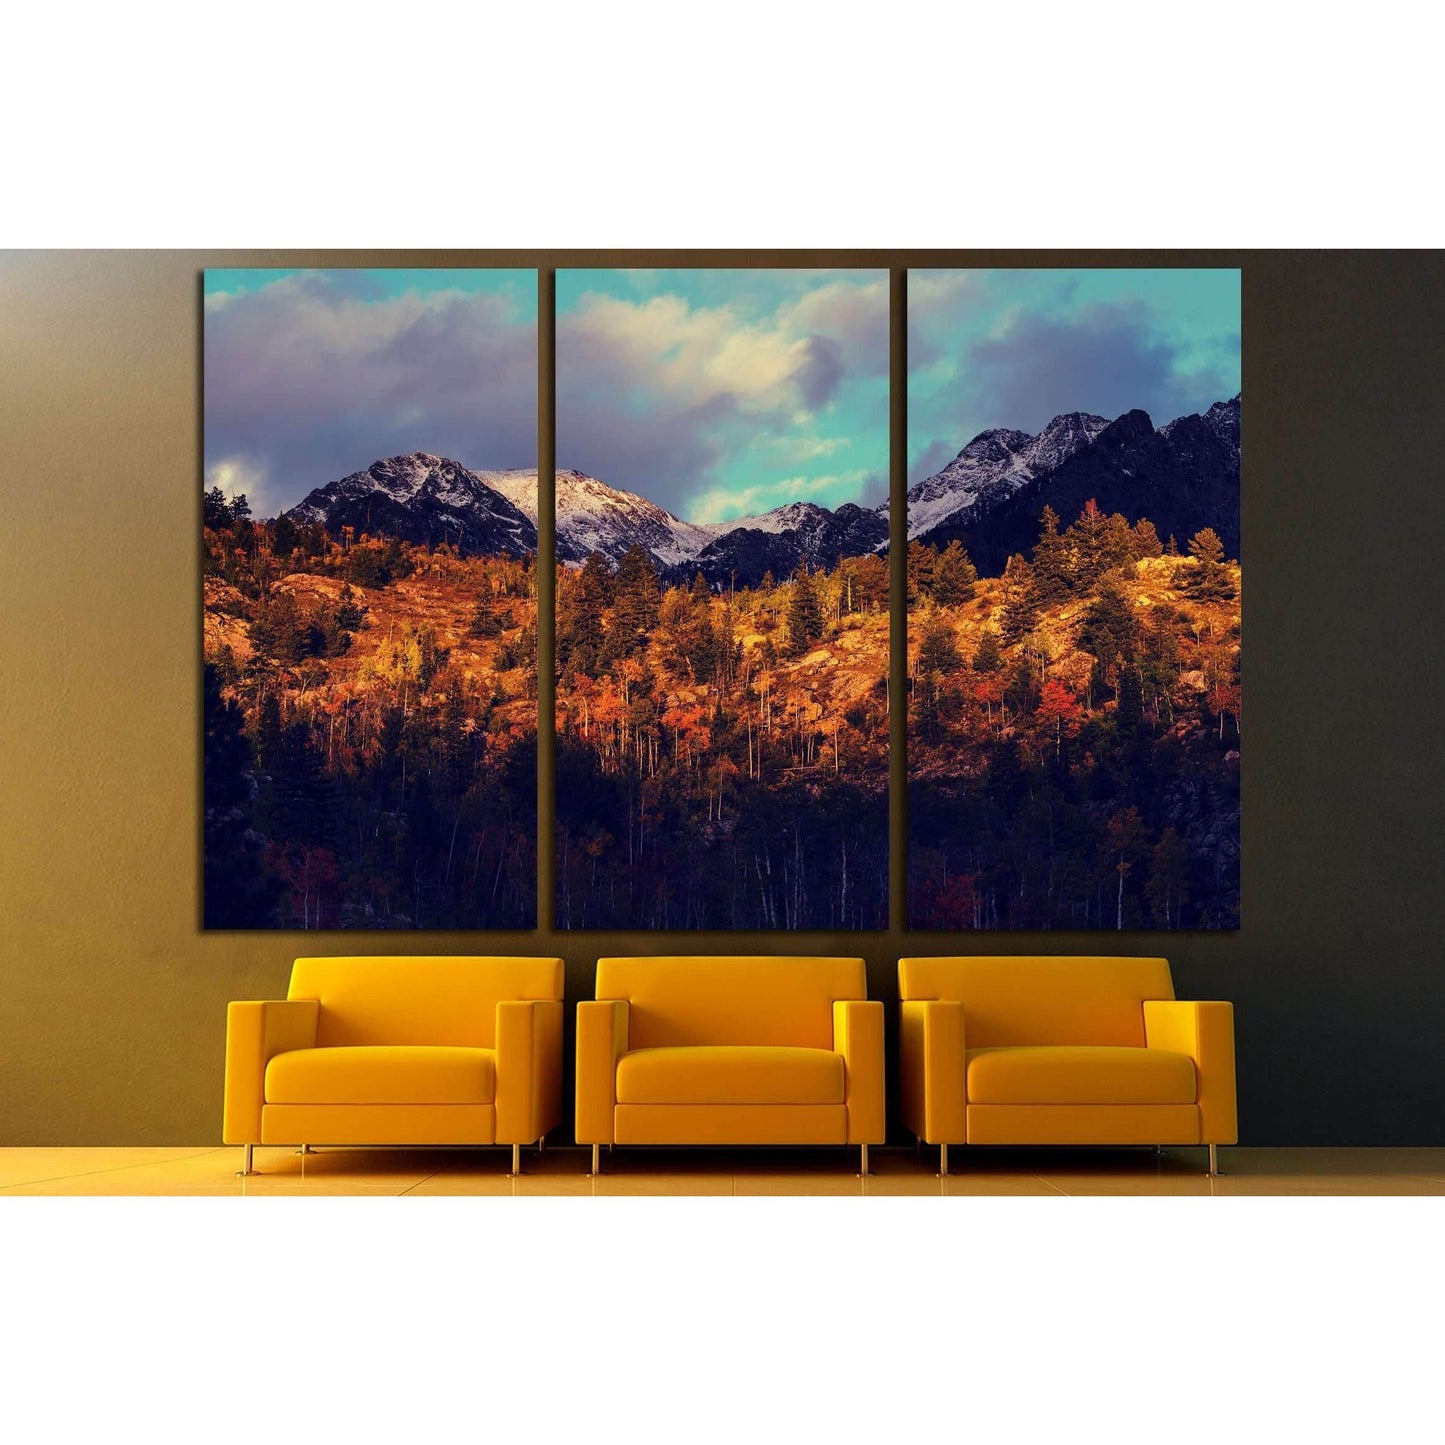 Autumn Mountainscape Canvas Print - Rustic Lodge Wall AccentThis five-panel canvas print showcases the majestic beauty of the Colorado mountains, with a foreground of autumn-colored trees against the backdrop of snow-capped peaks. The rich, warm tones of